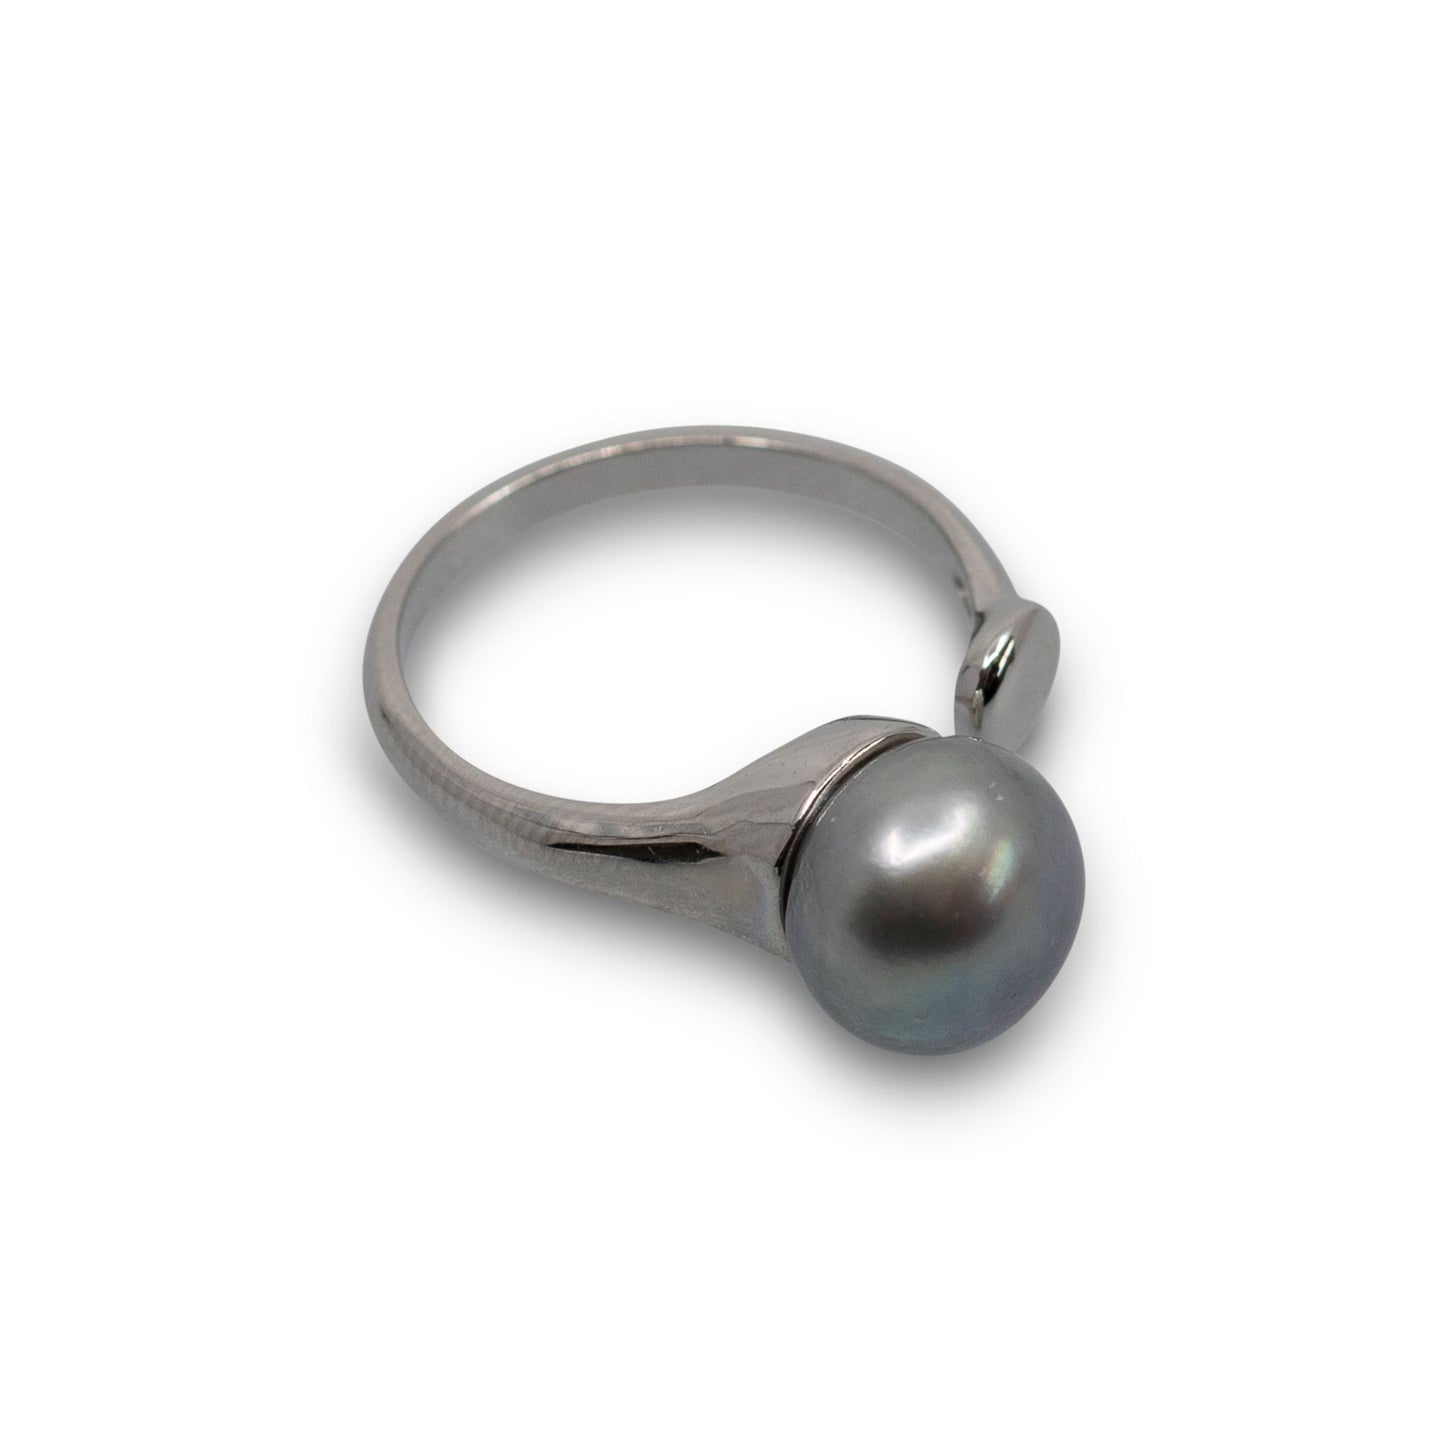 Lala - Silver-Tone Freshwater Pearl Adjustable Ring